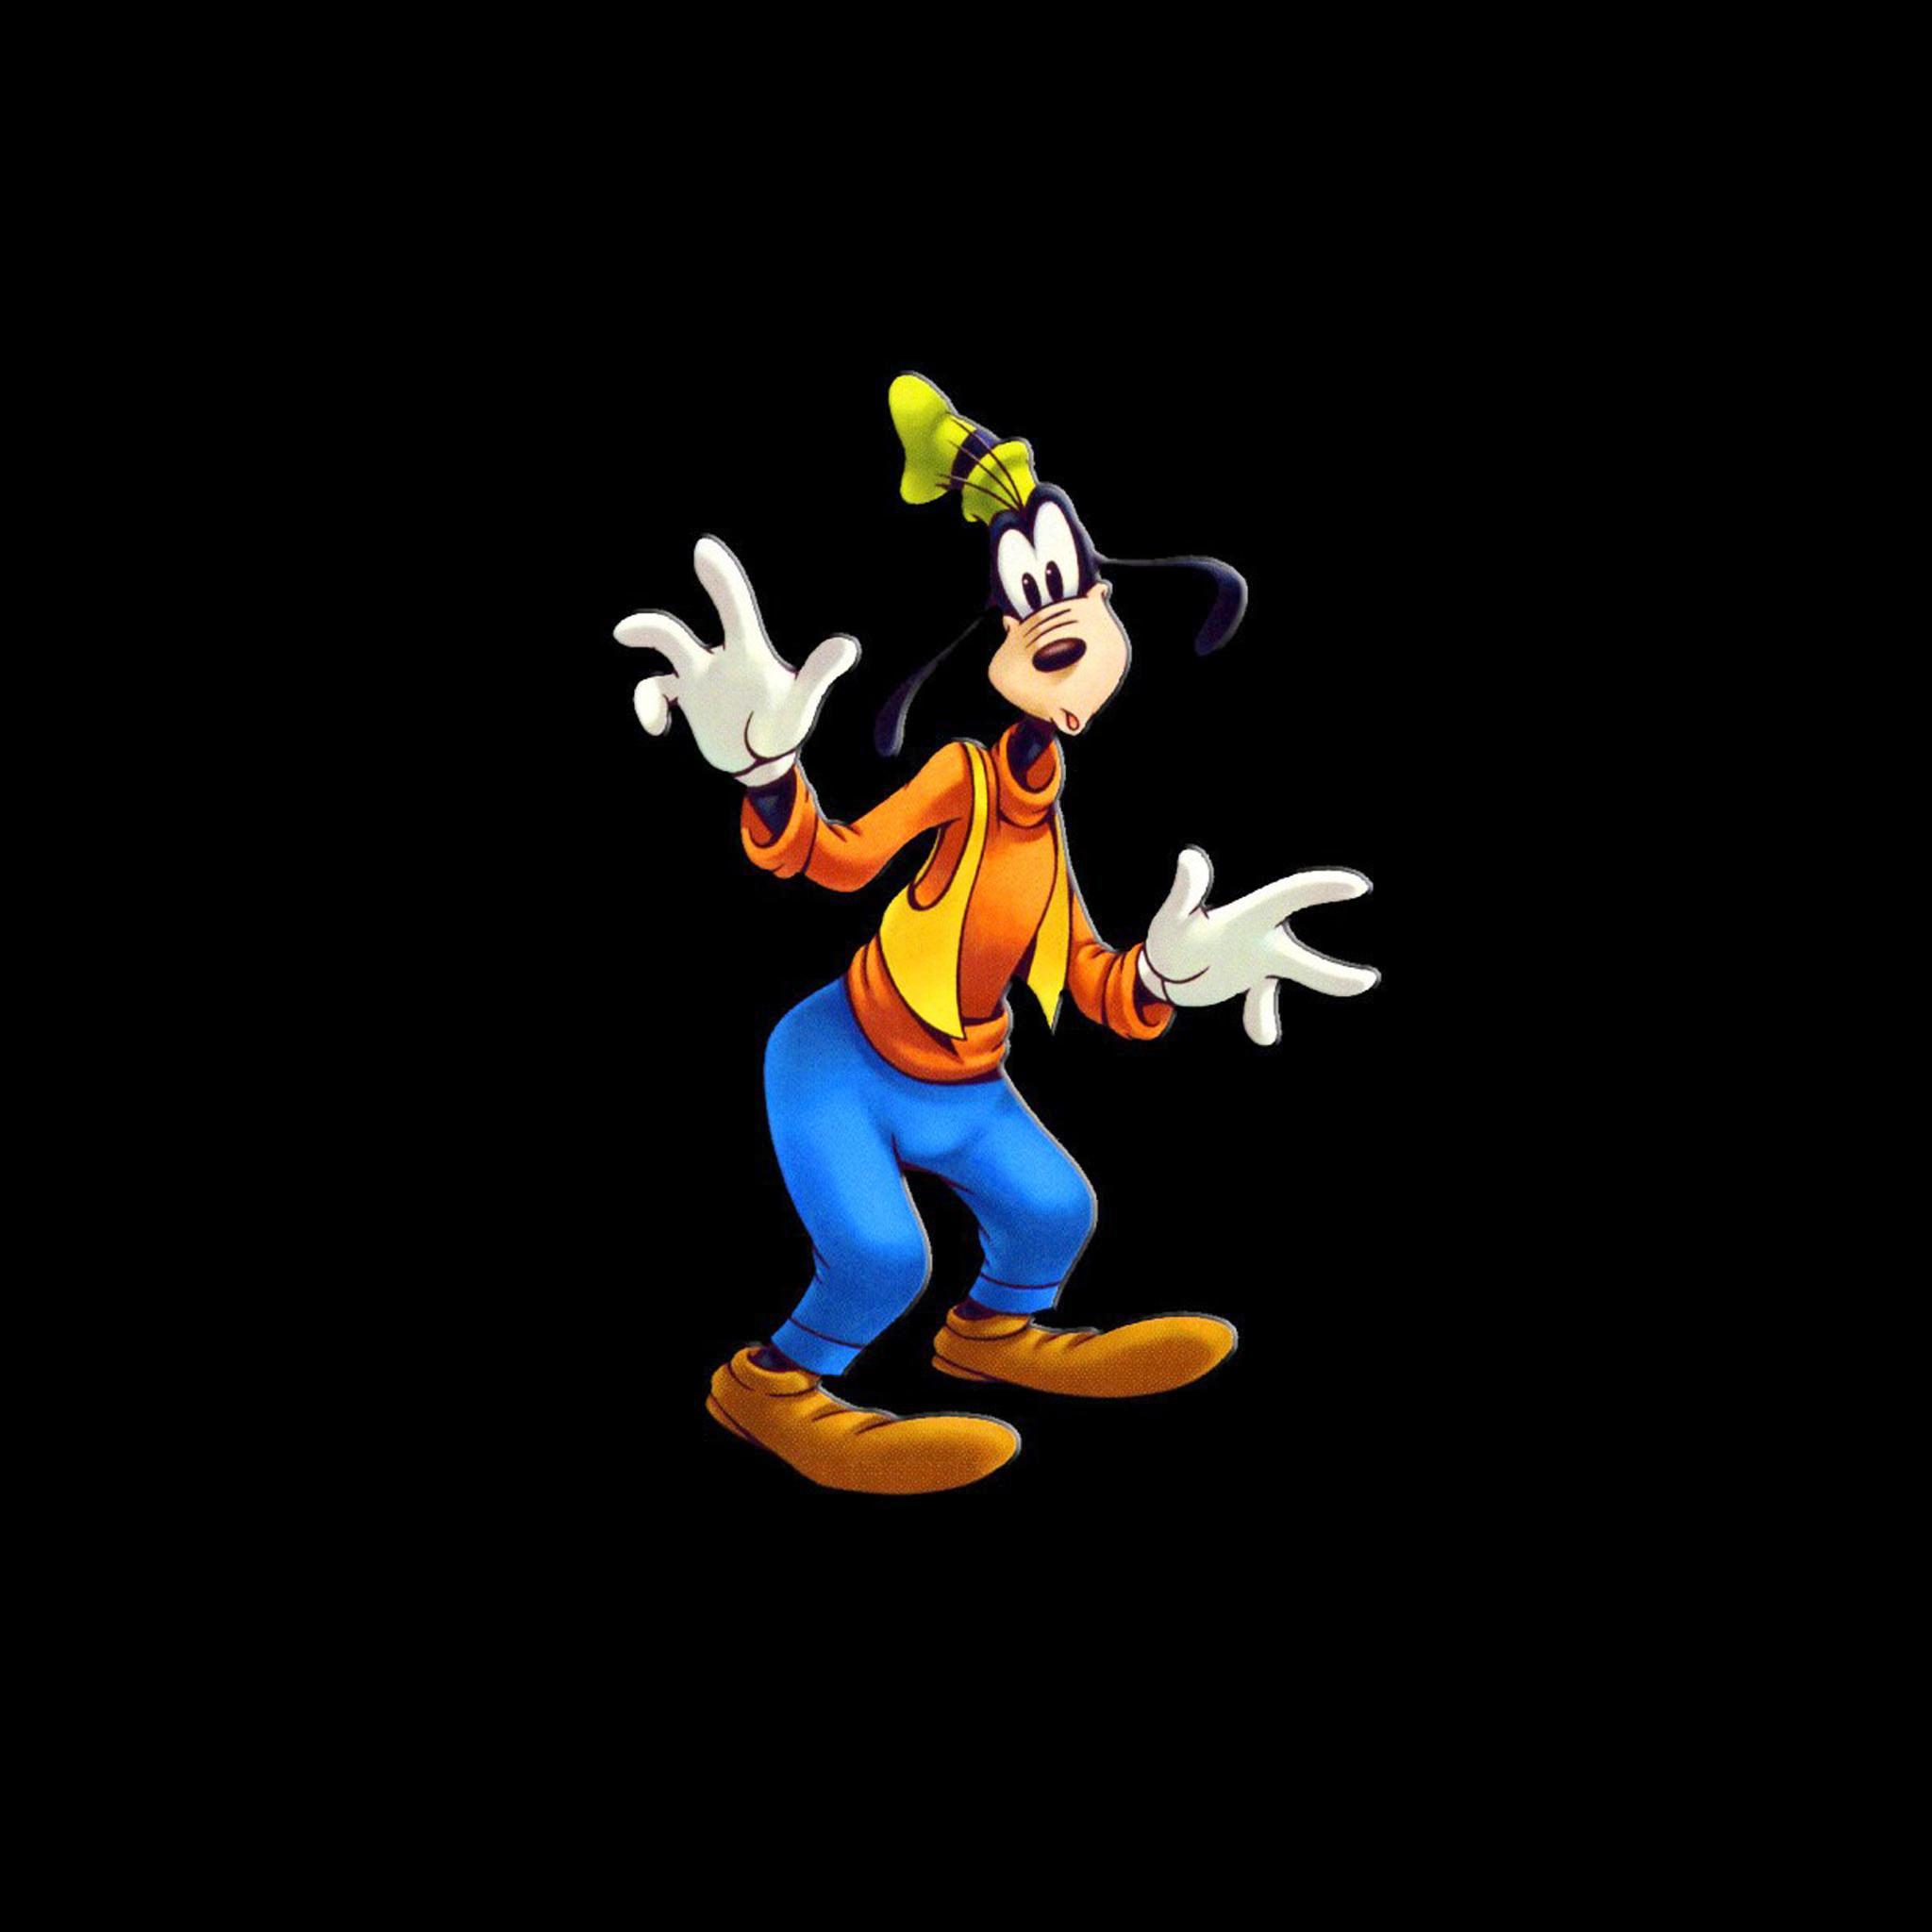 Goofy Black Background Hd Pictures Goofy Walt Disney Wallpapers 48x48px Hd Wallpapers 5048 Ngewall Com Ipad タブレット壁紙ギャラリー